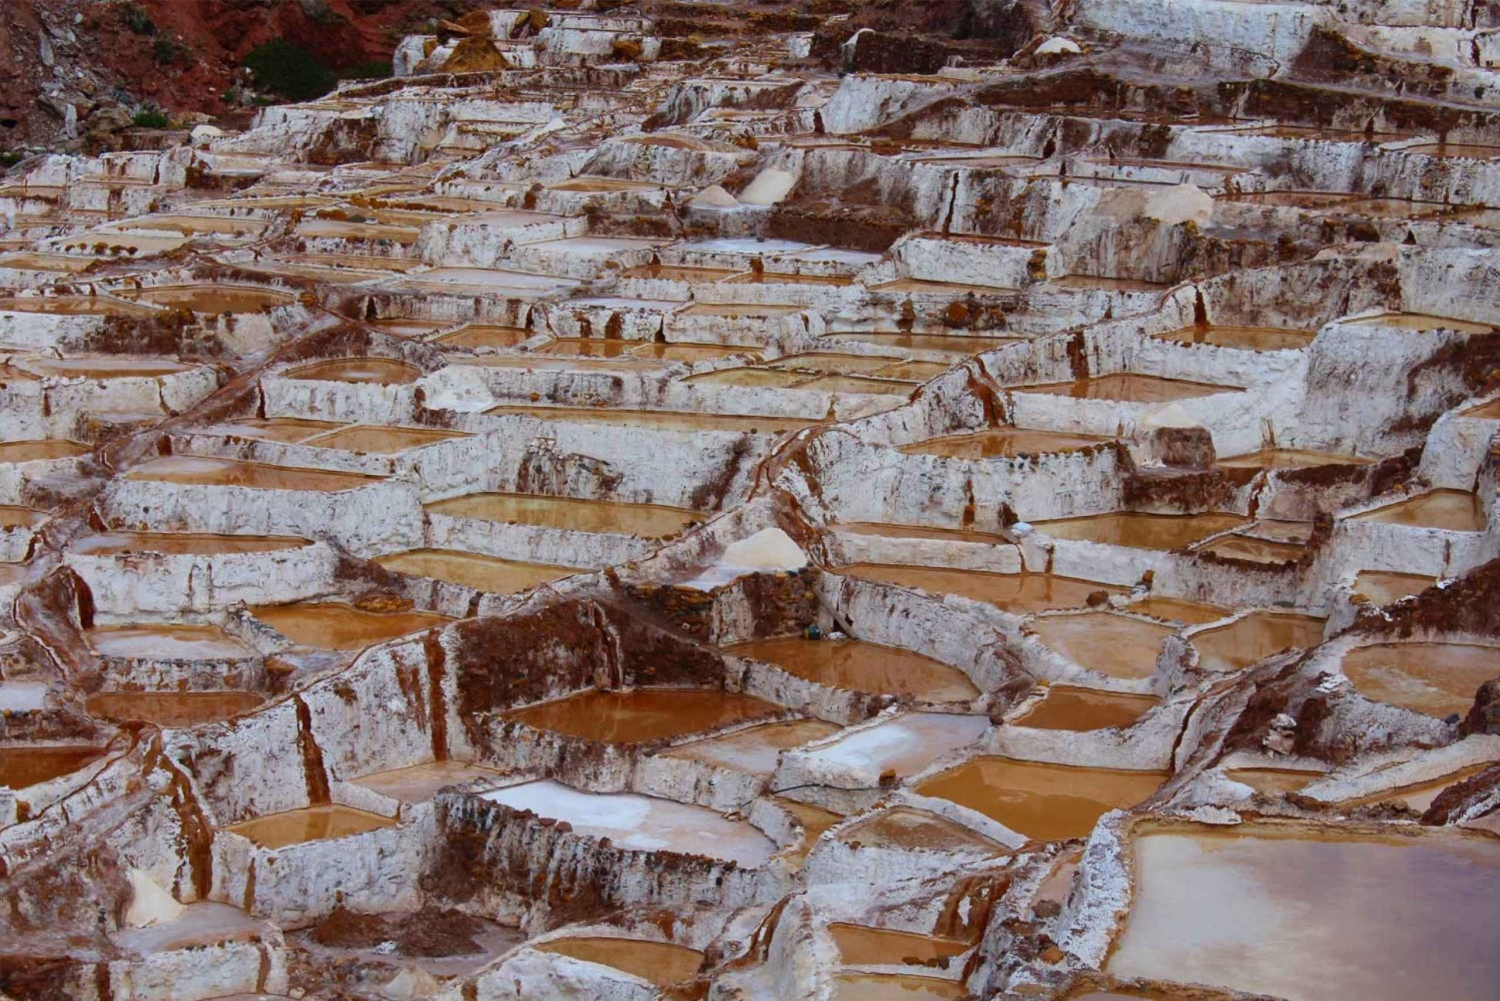 From Cusco: Salt mines of Maras and Moray half day